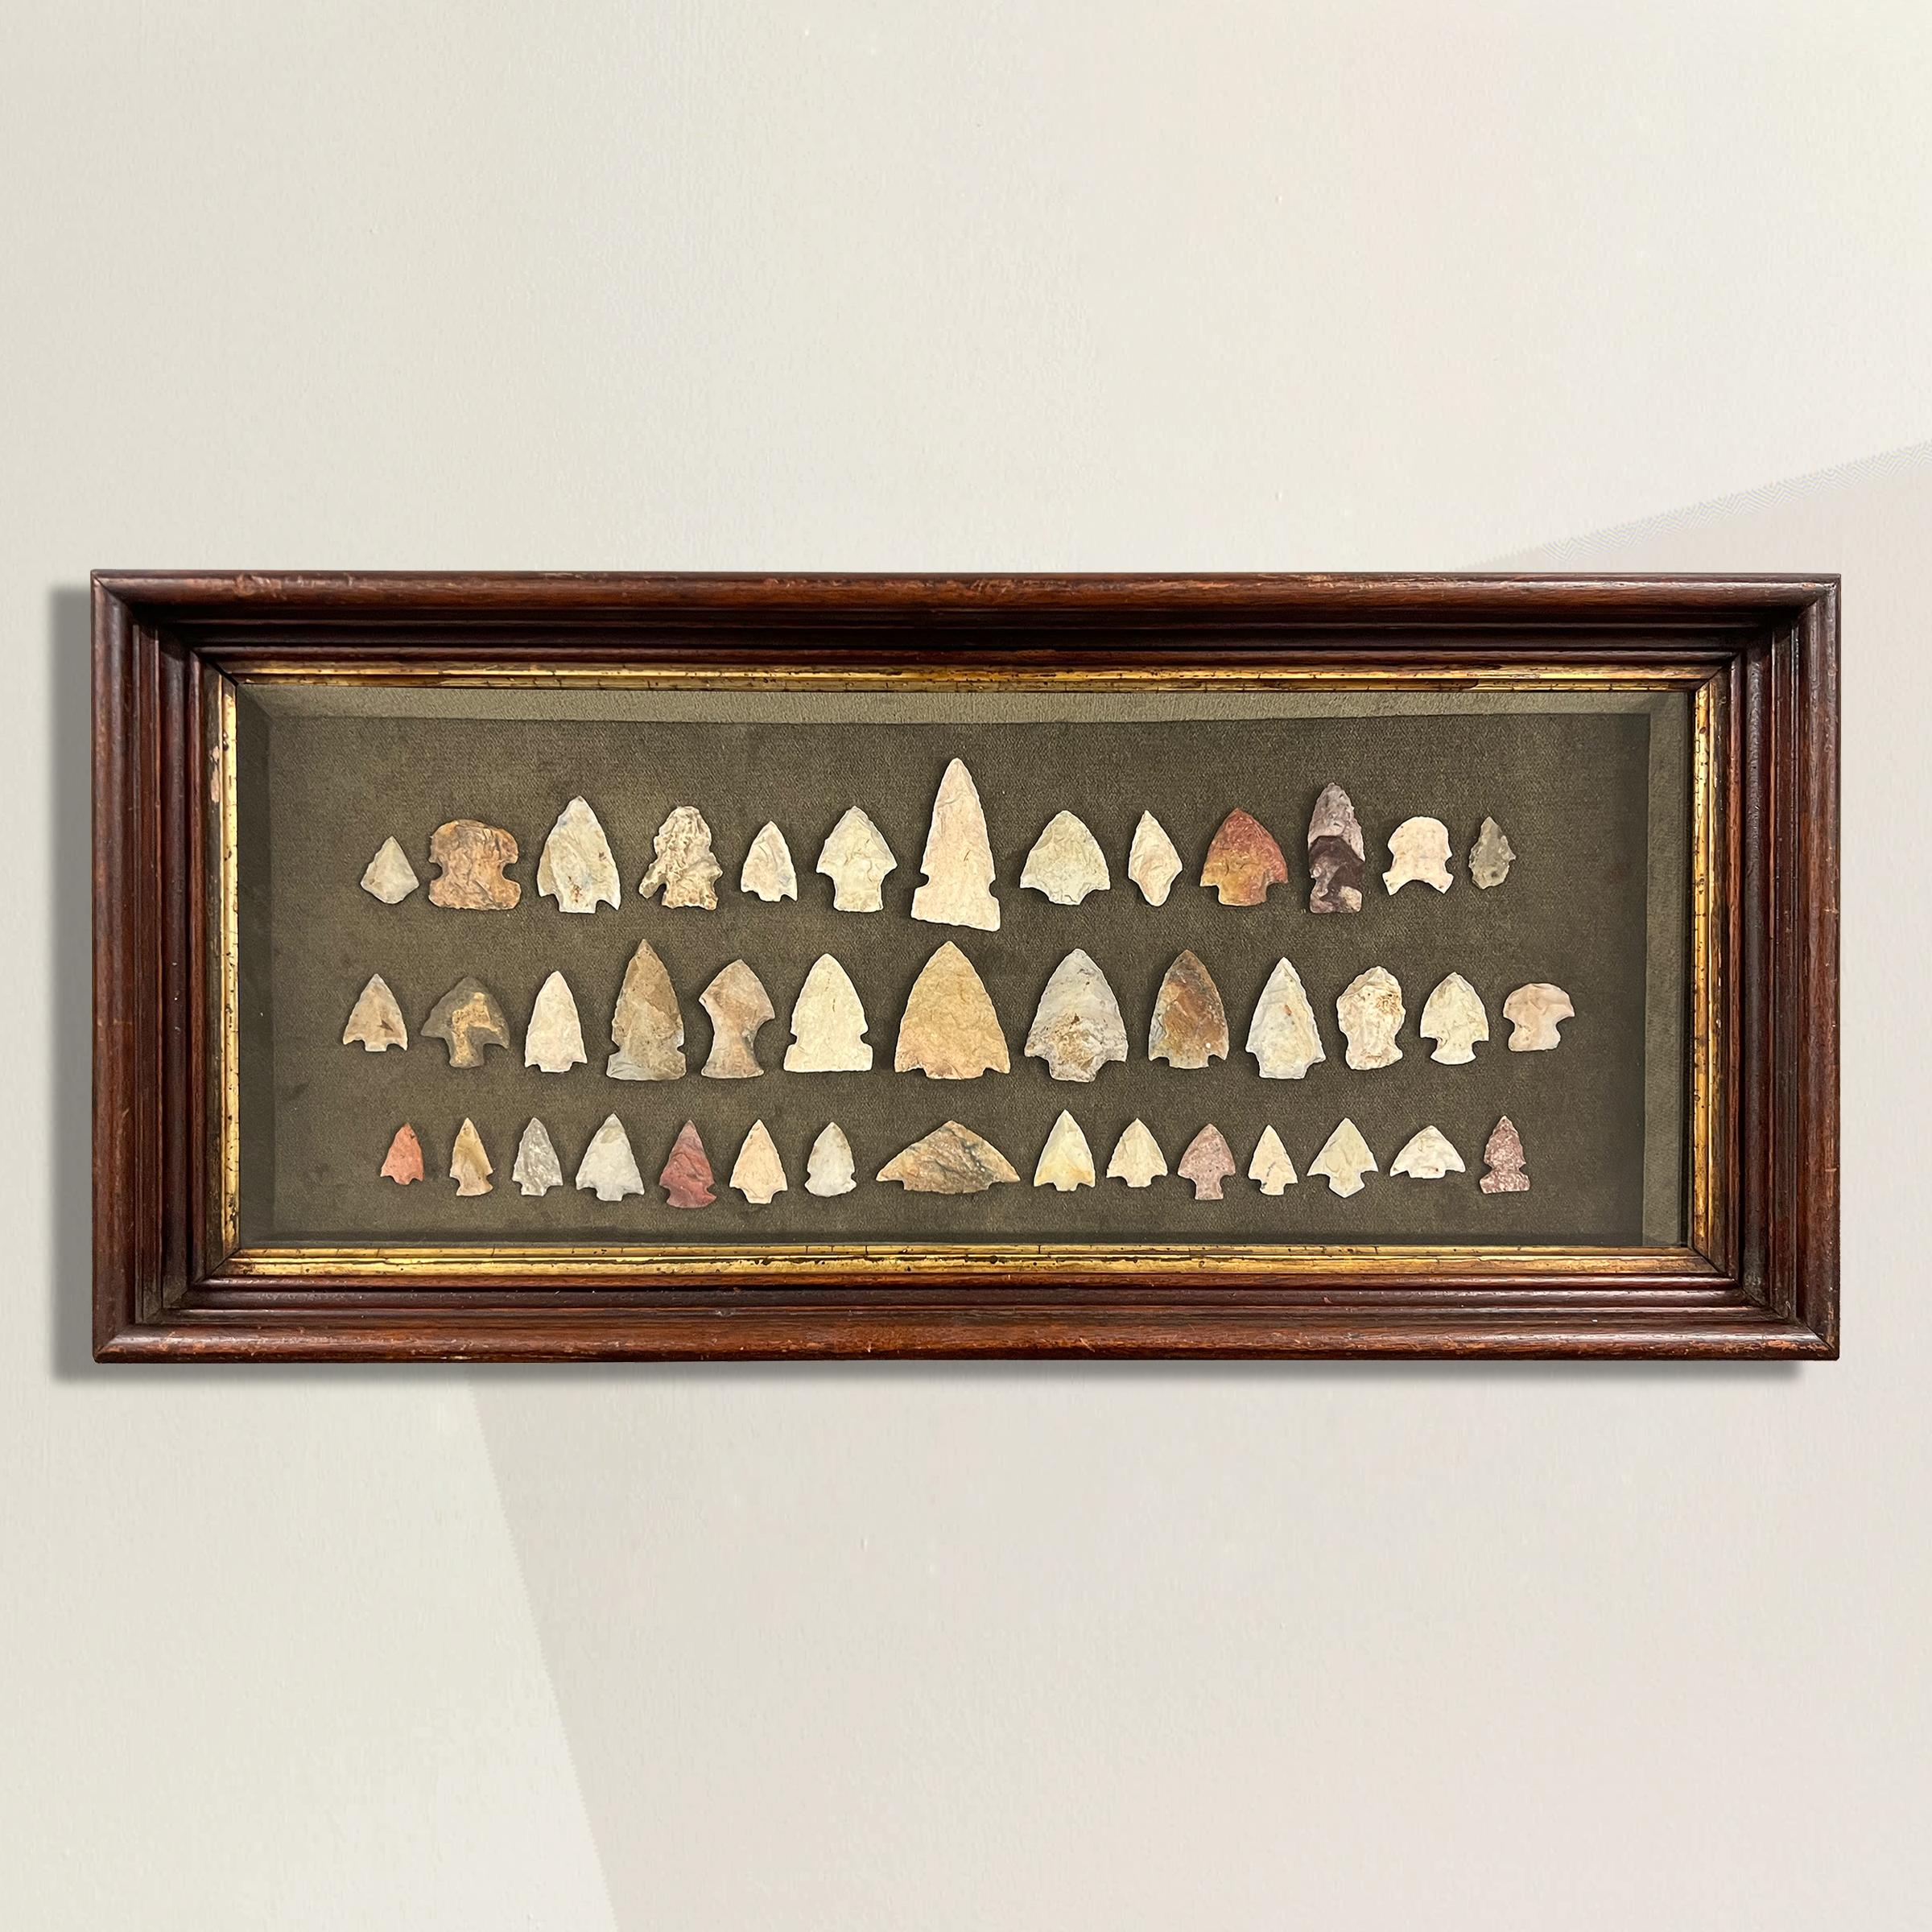 A captivating set of forty-one arrowheads found in Wisconsin's Waukesha County, mounted and framed in a 19th century shadowbox. These arrowheads, crafted by the skilled hands of Native American artisans, carry with them the echoes of an ancient